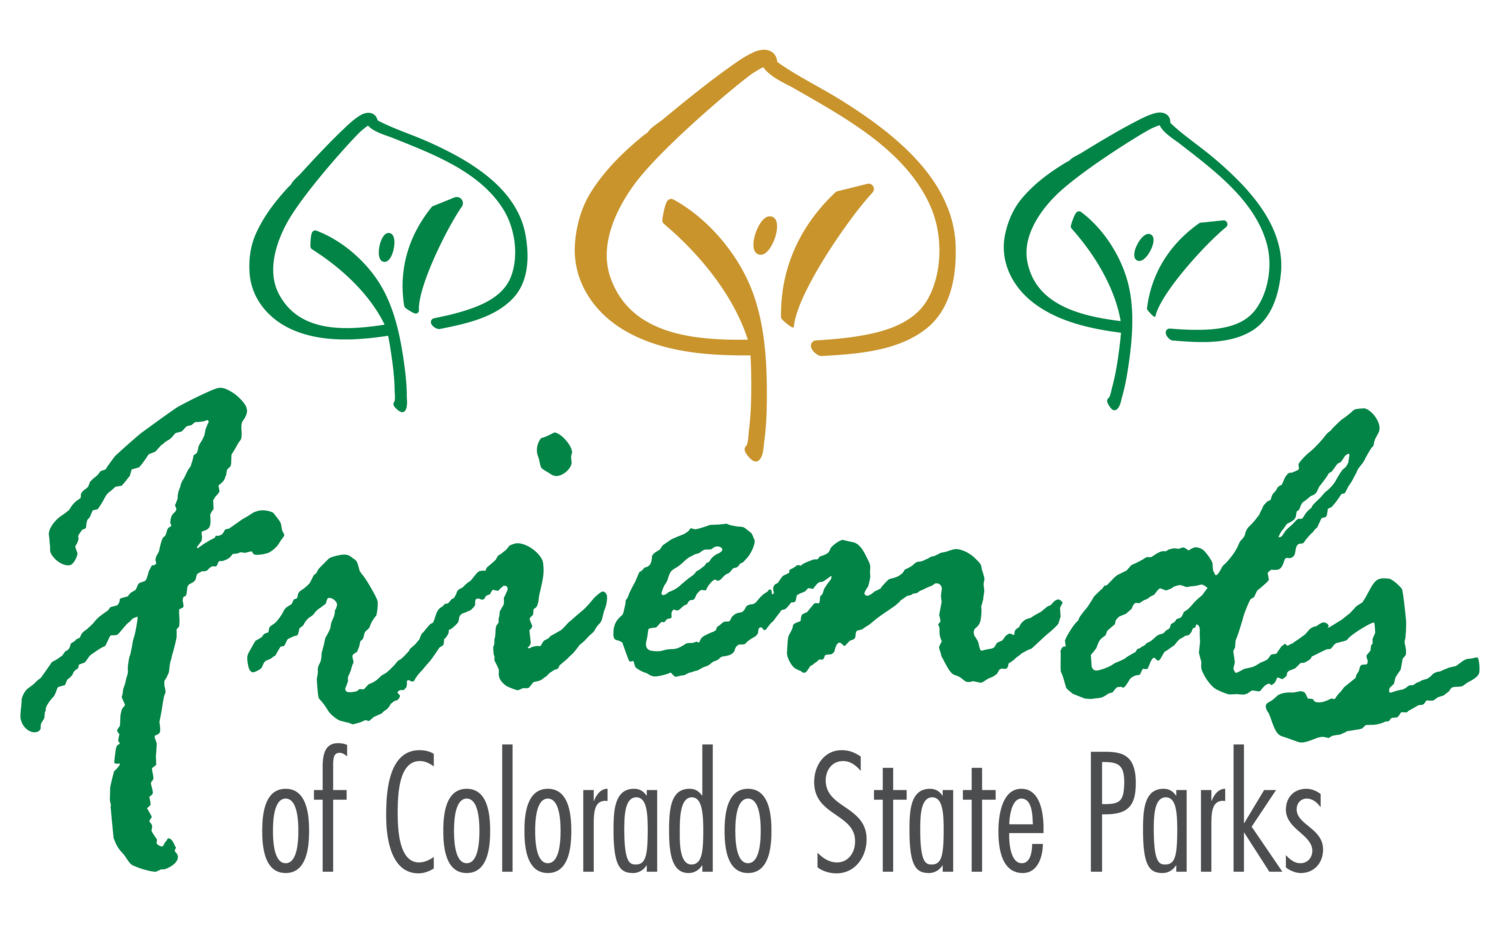 Friends of Colorado State Parks